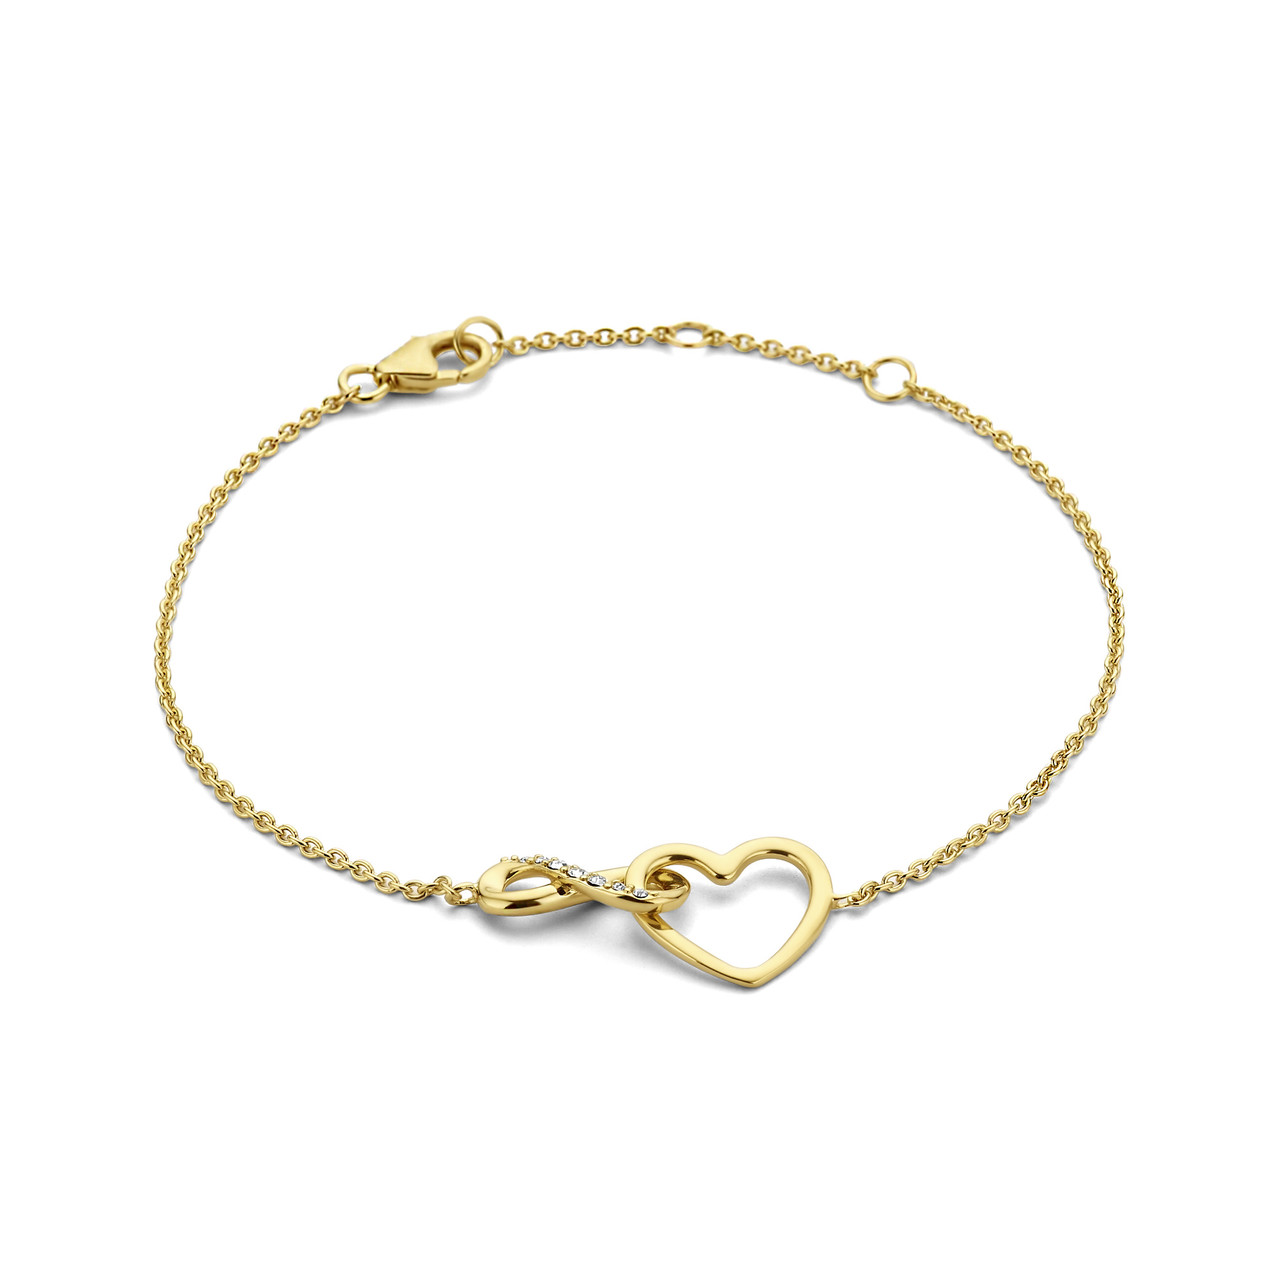 Cheapest Price 16cm Tennis Bracelet - Aimée 925 sterling silver gold coloured bracelet with infinity sign and heart – XH&SILVER